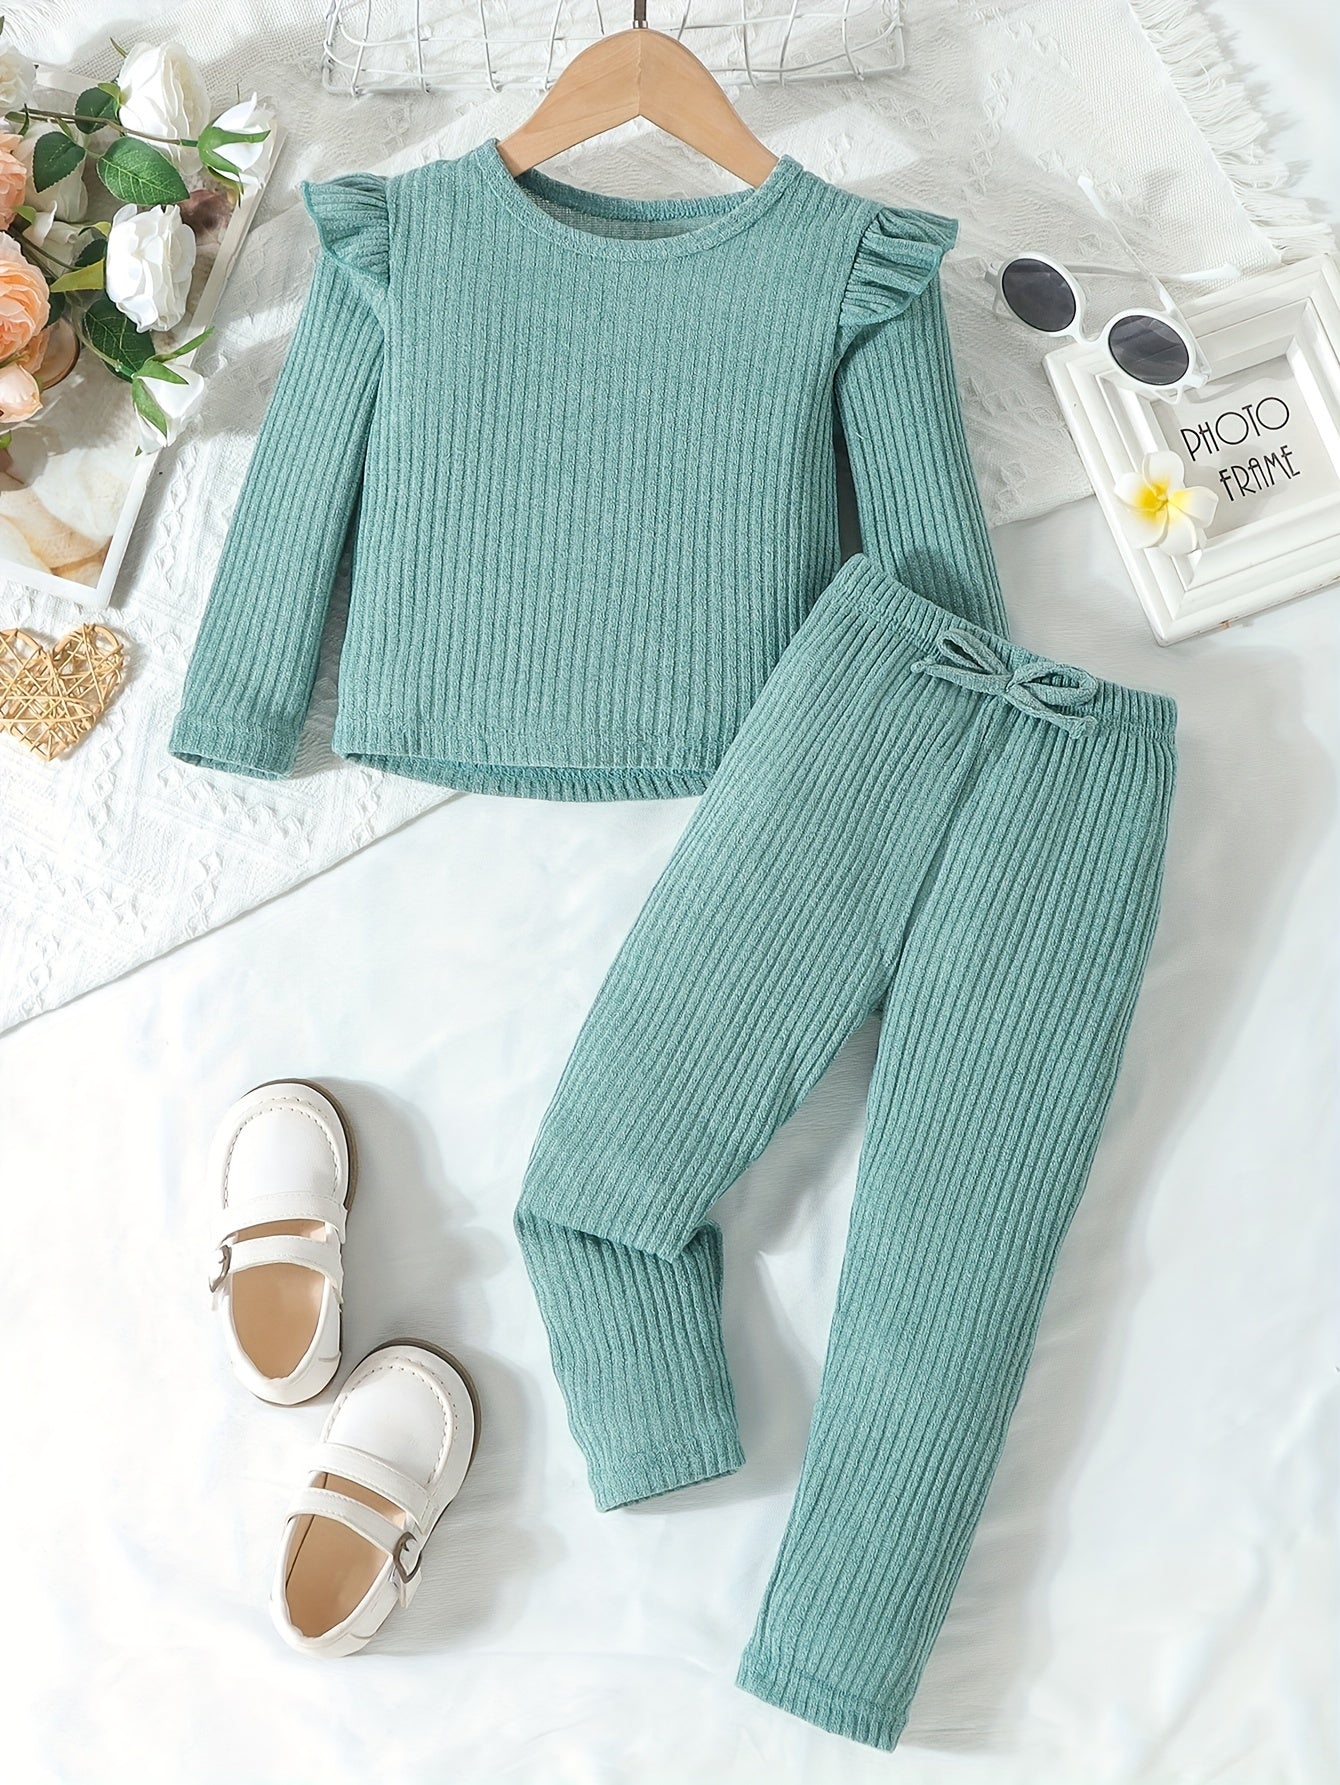 Girl's Solid Color Outfit 2pcs, Ribbed Long Sleeve Top & Pants Set, Kid's Clothes For Spring Fall